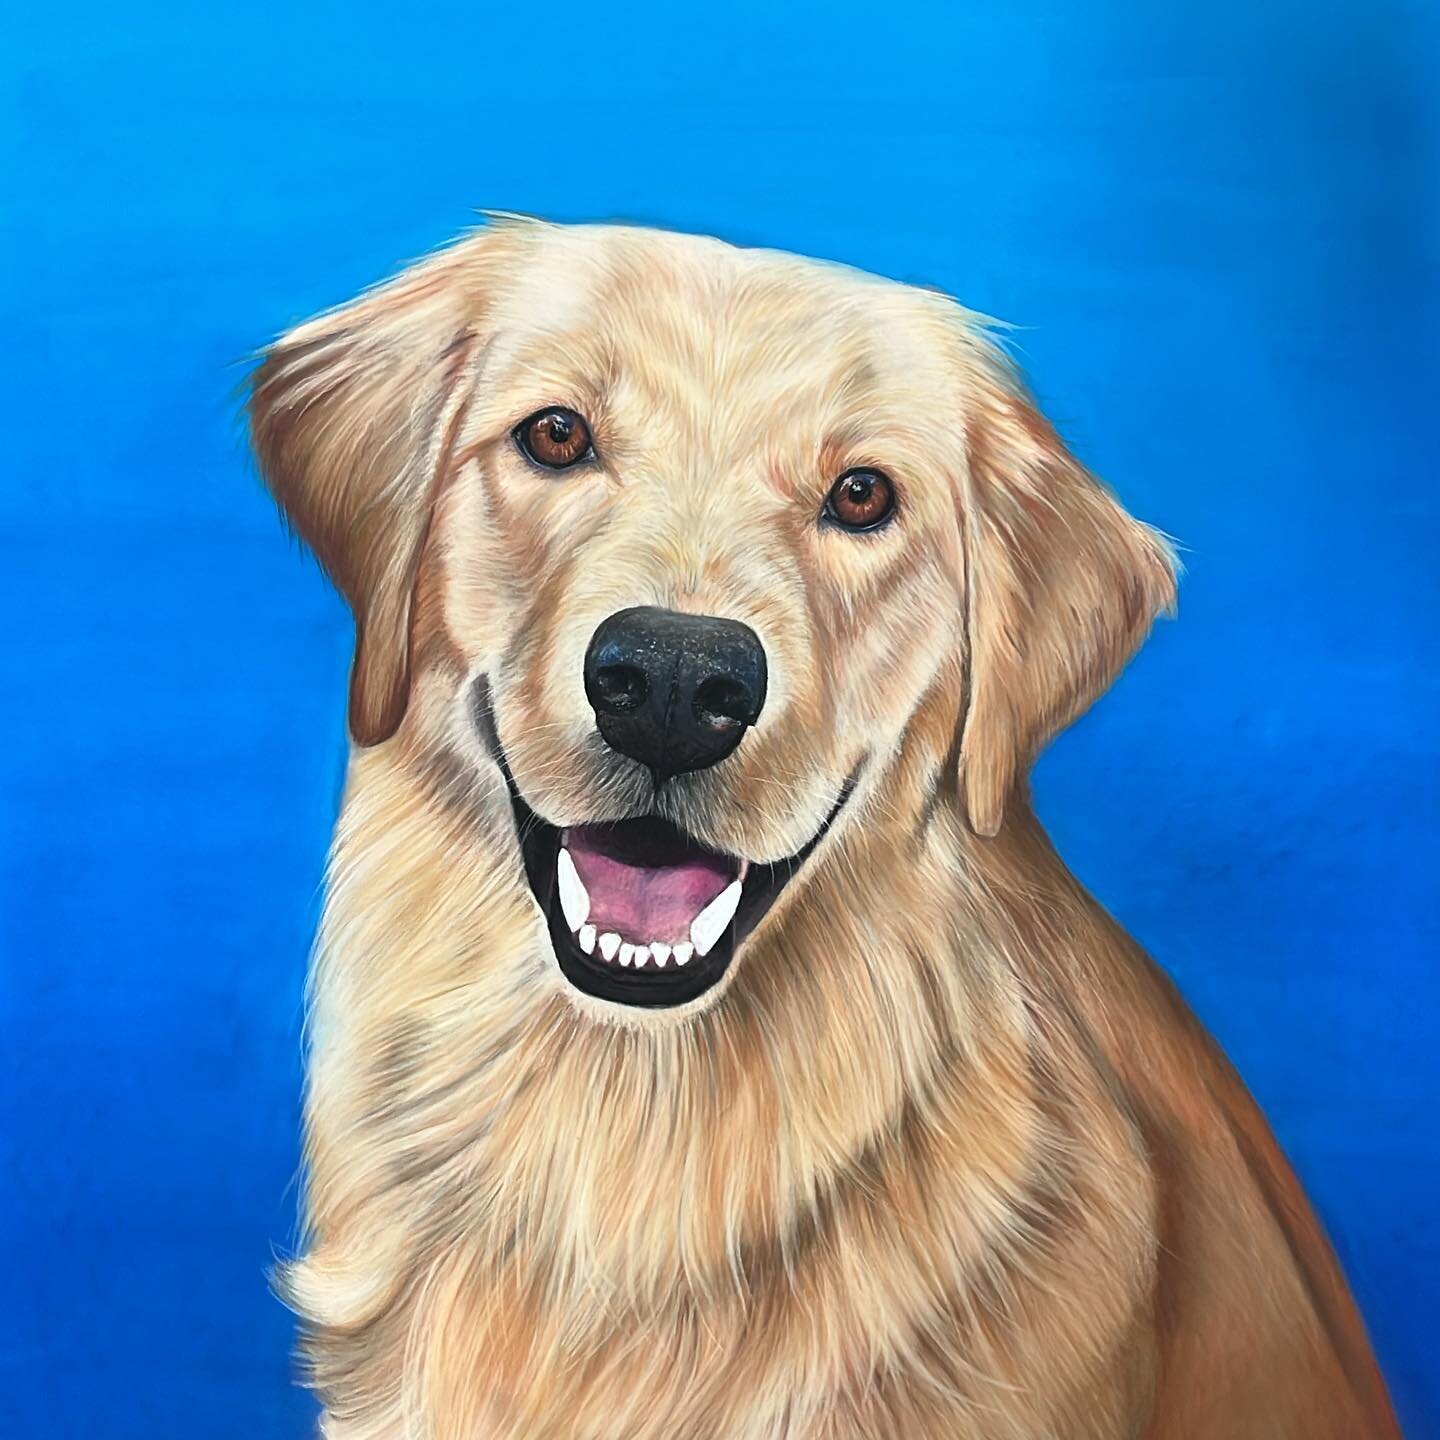 This sweet golden is done 🥹